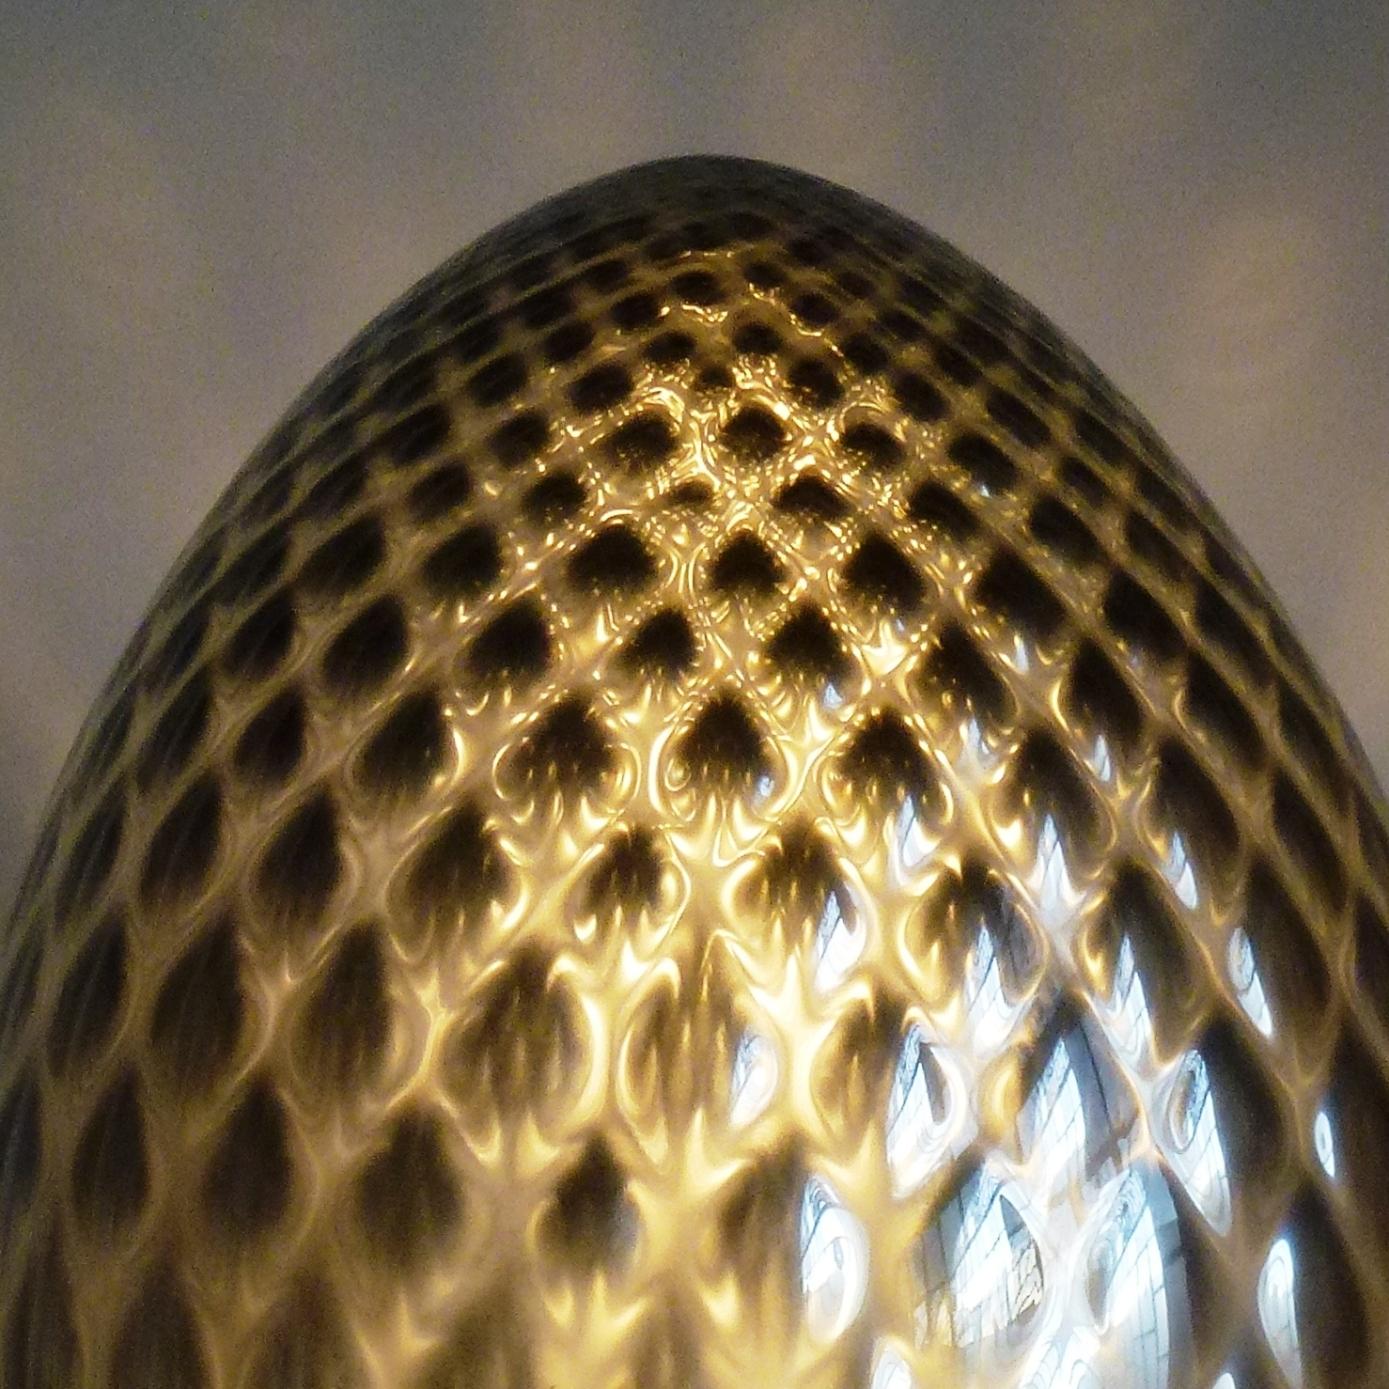 Contemporary Silver Glass Egg Lamp, Italy, 2000s For Sale